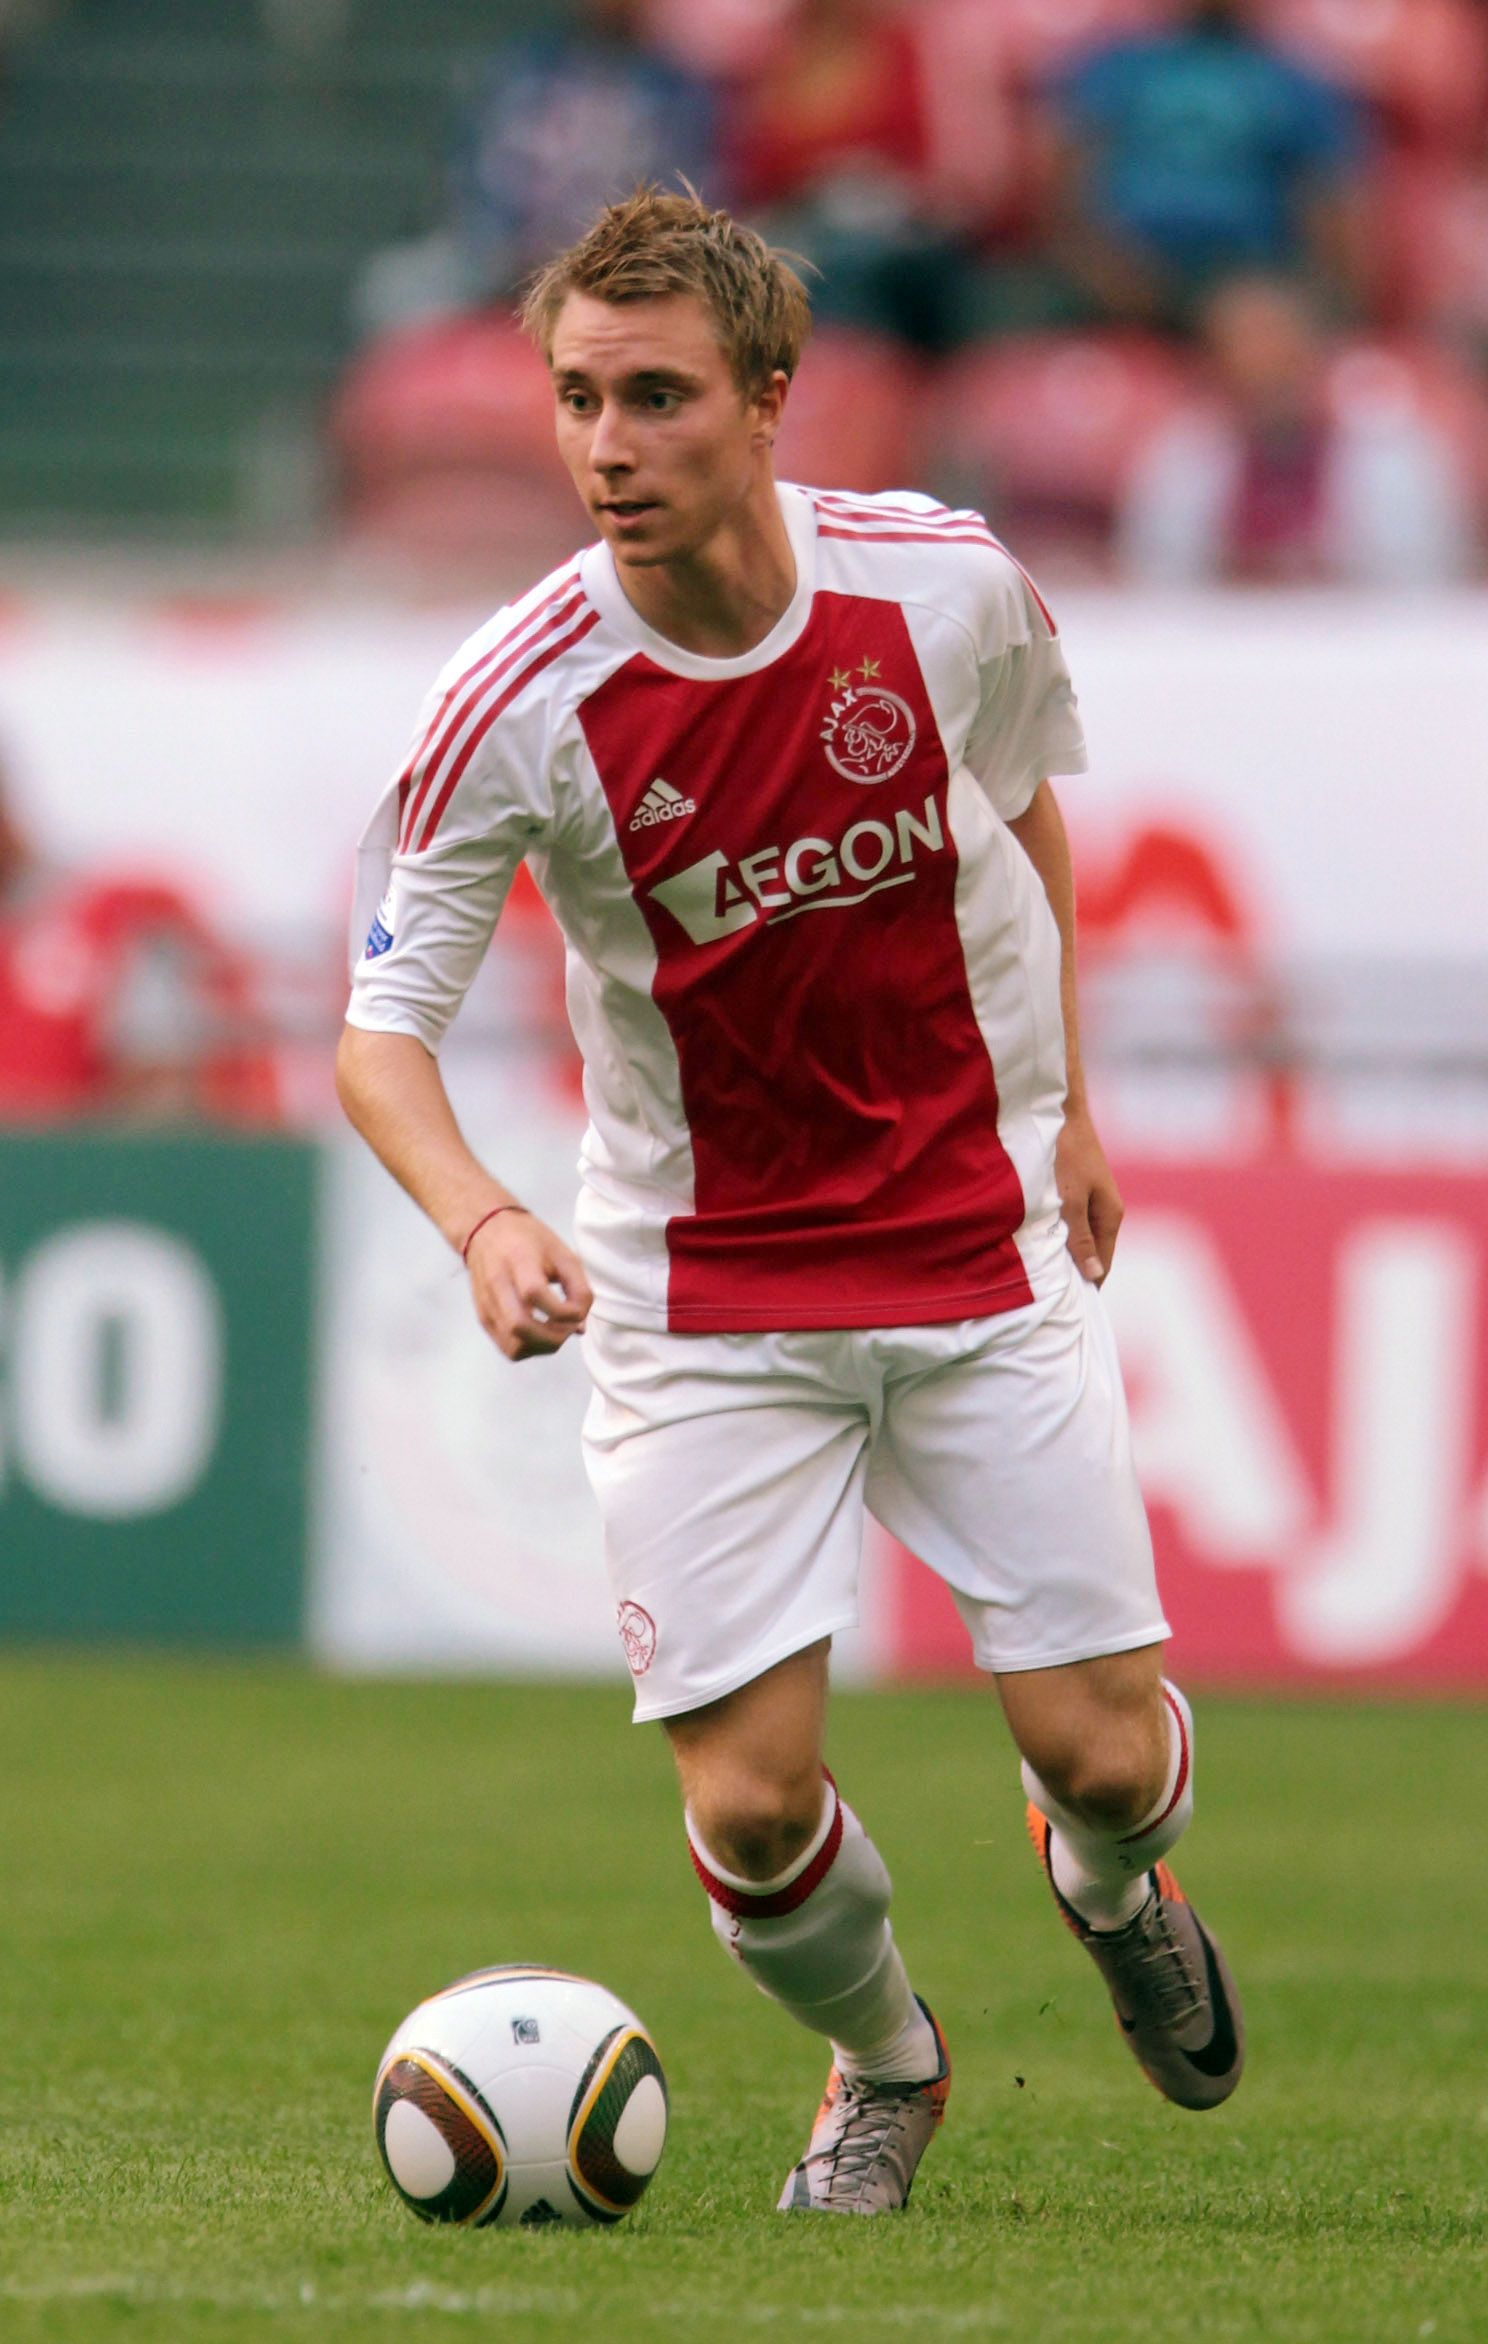 AMSTERDAM, NETHERLANDS - JULY 23:  Christian Eriksen of Ajax during a Pre-seson Friendly match between Chelsea and Ajax at Amsterdam Arena on July 23, 2010 in Amsterdam, Netherlands.  (Photo by Phil Cole/Getty Images)